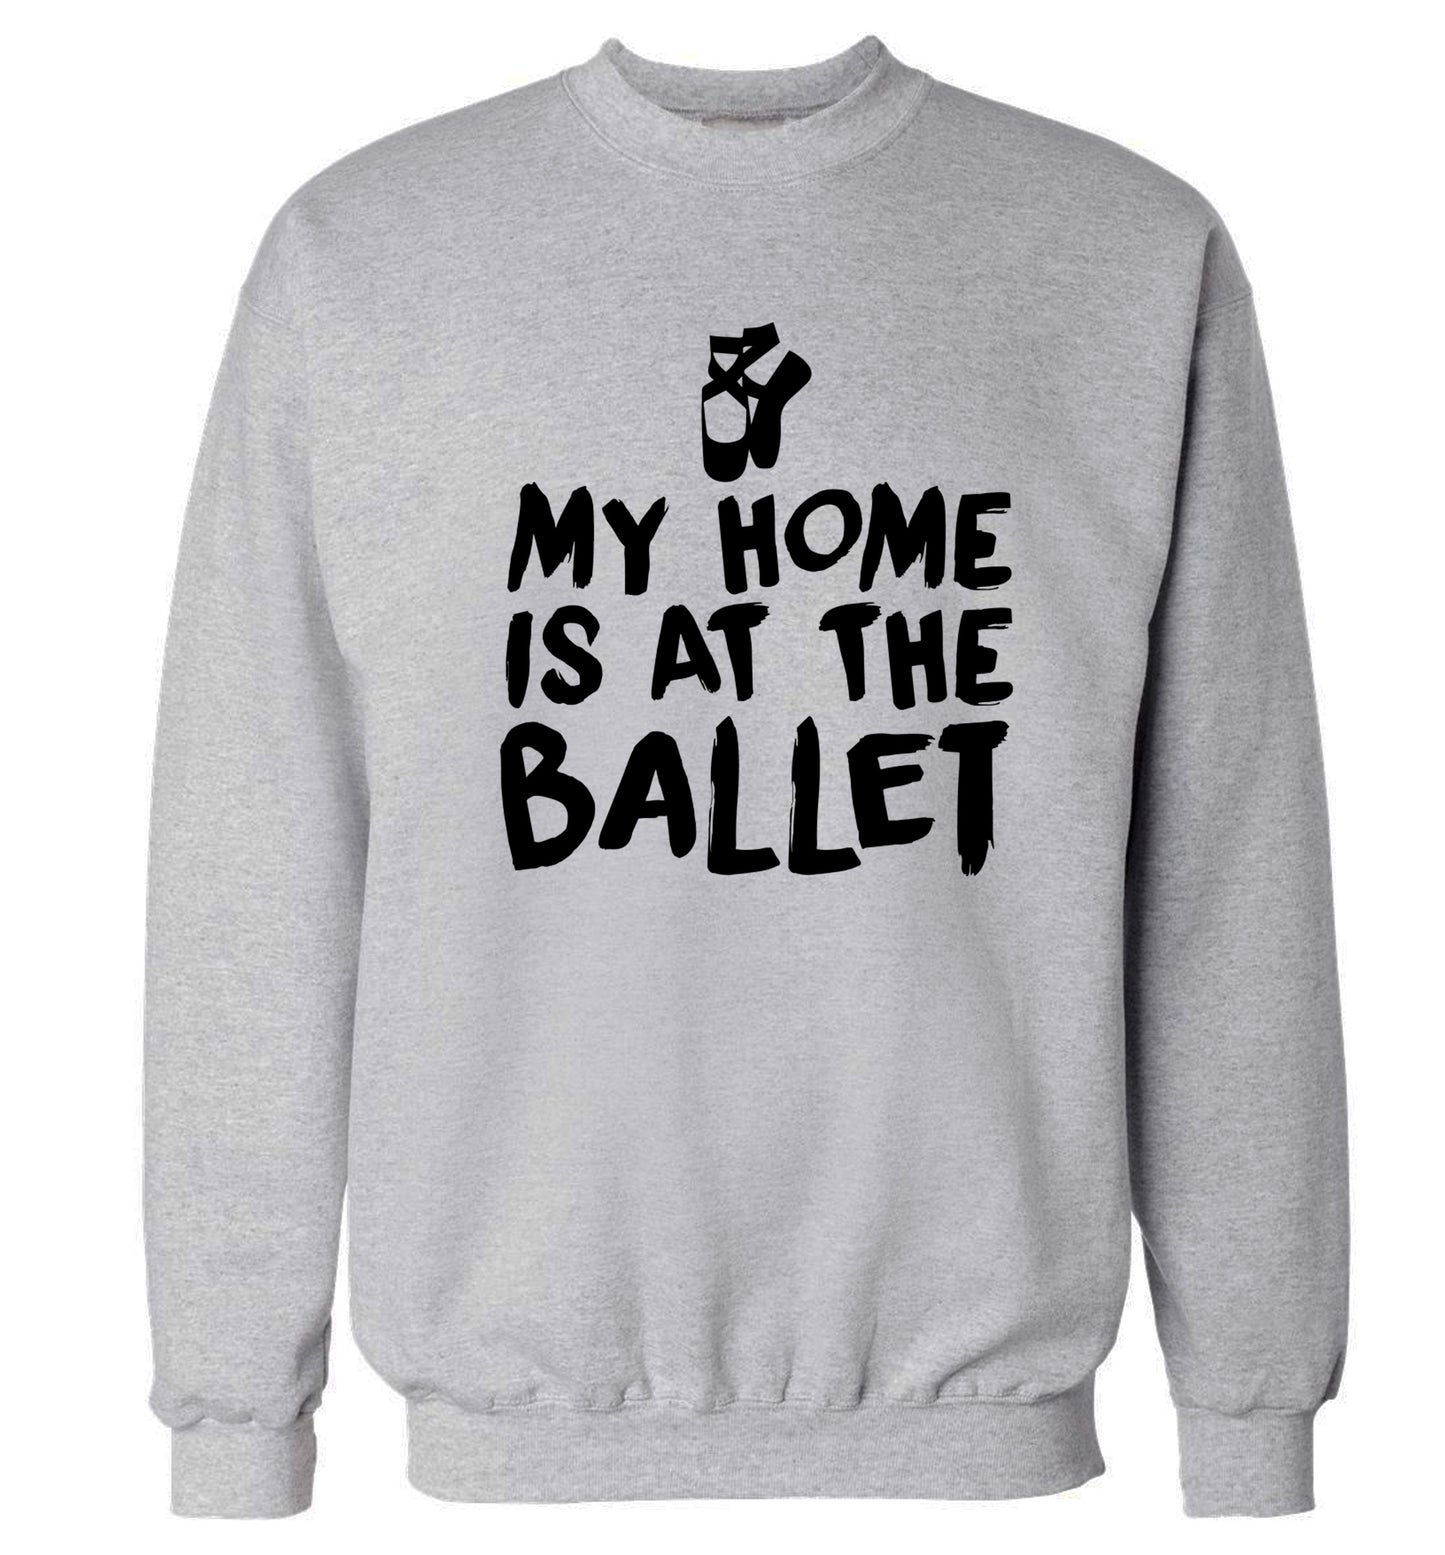 My home is at the dance studio Adult's unisex grey Sweater 2XL